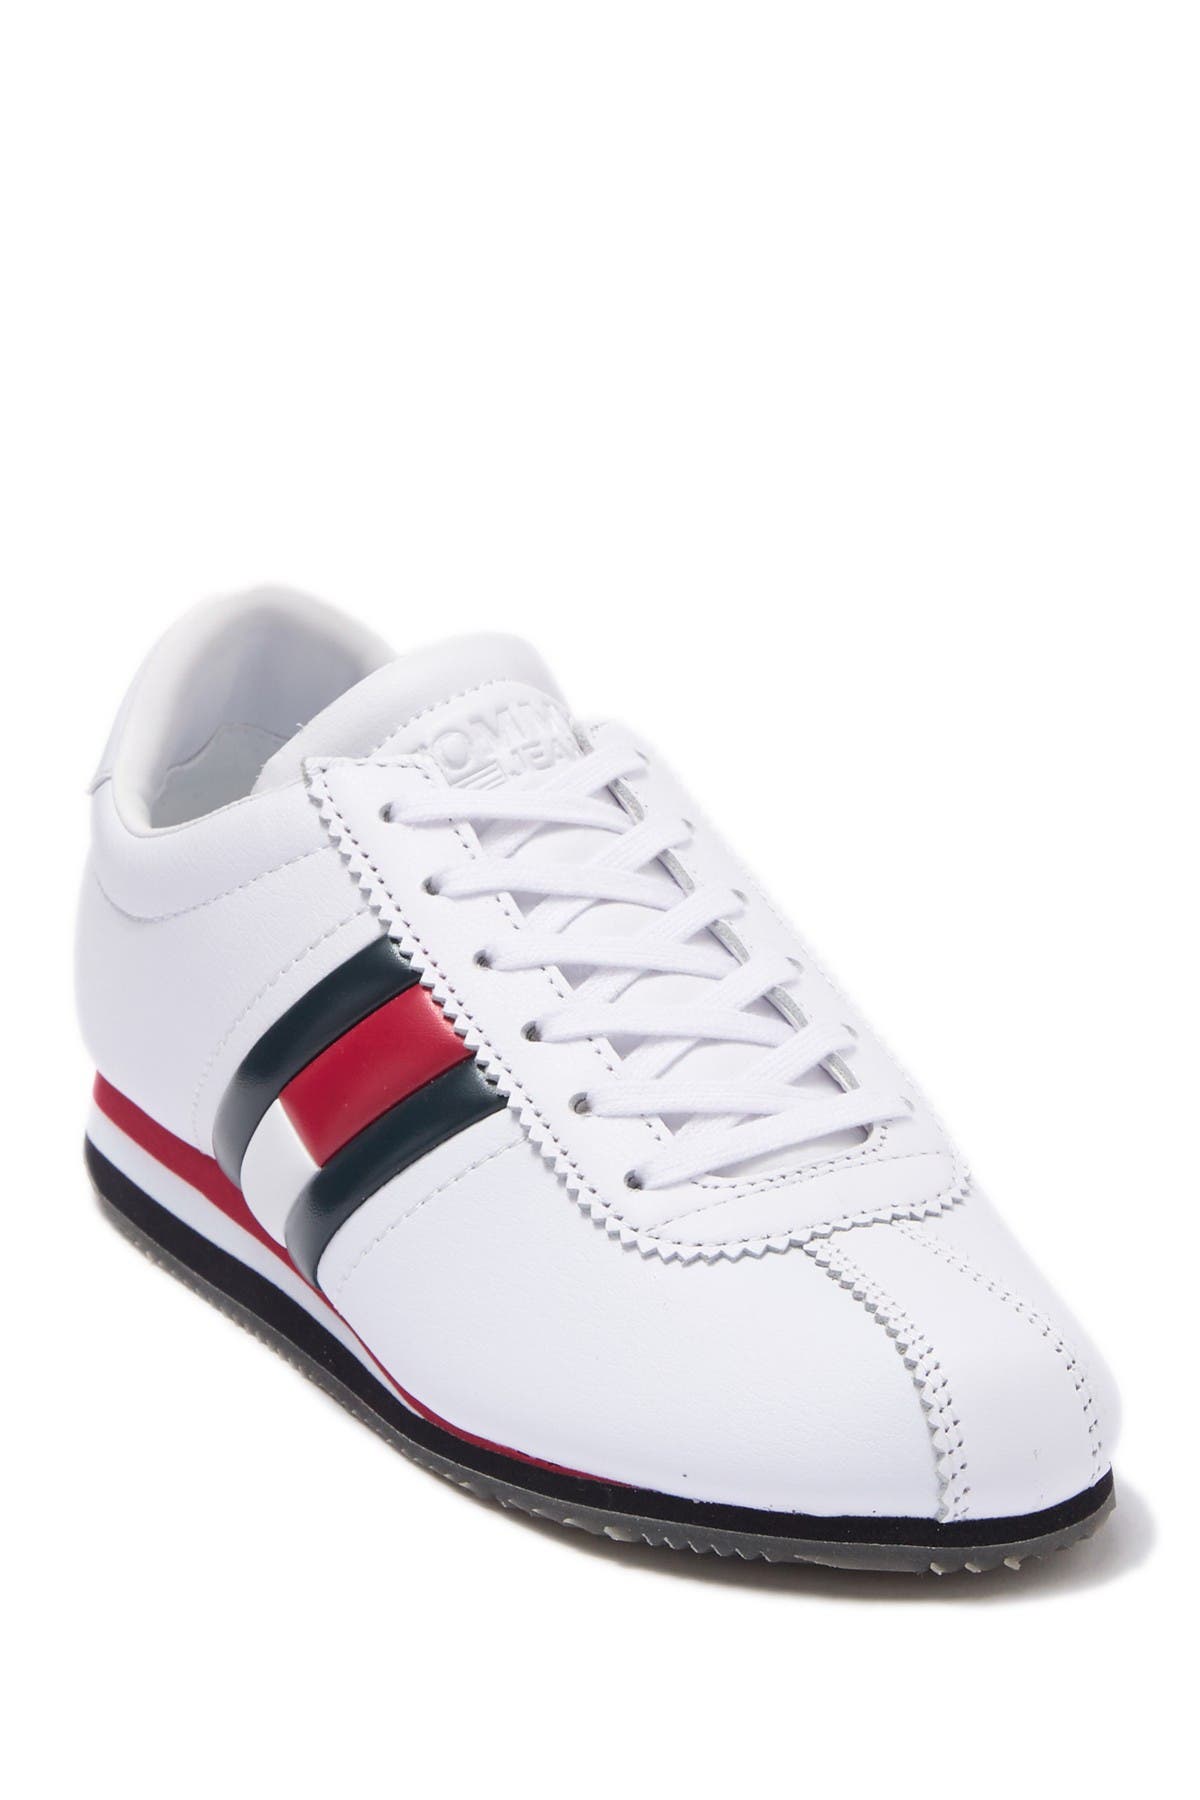 tommy jeans retro flag sneaker